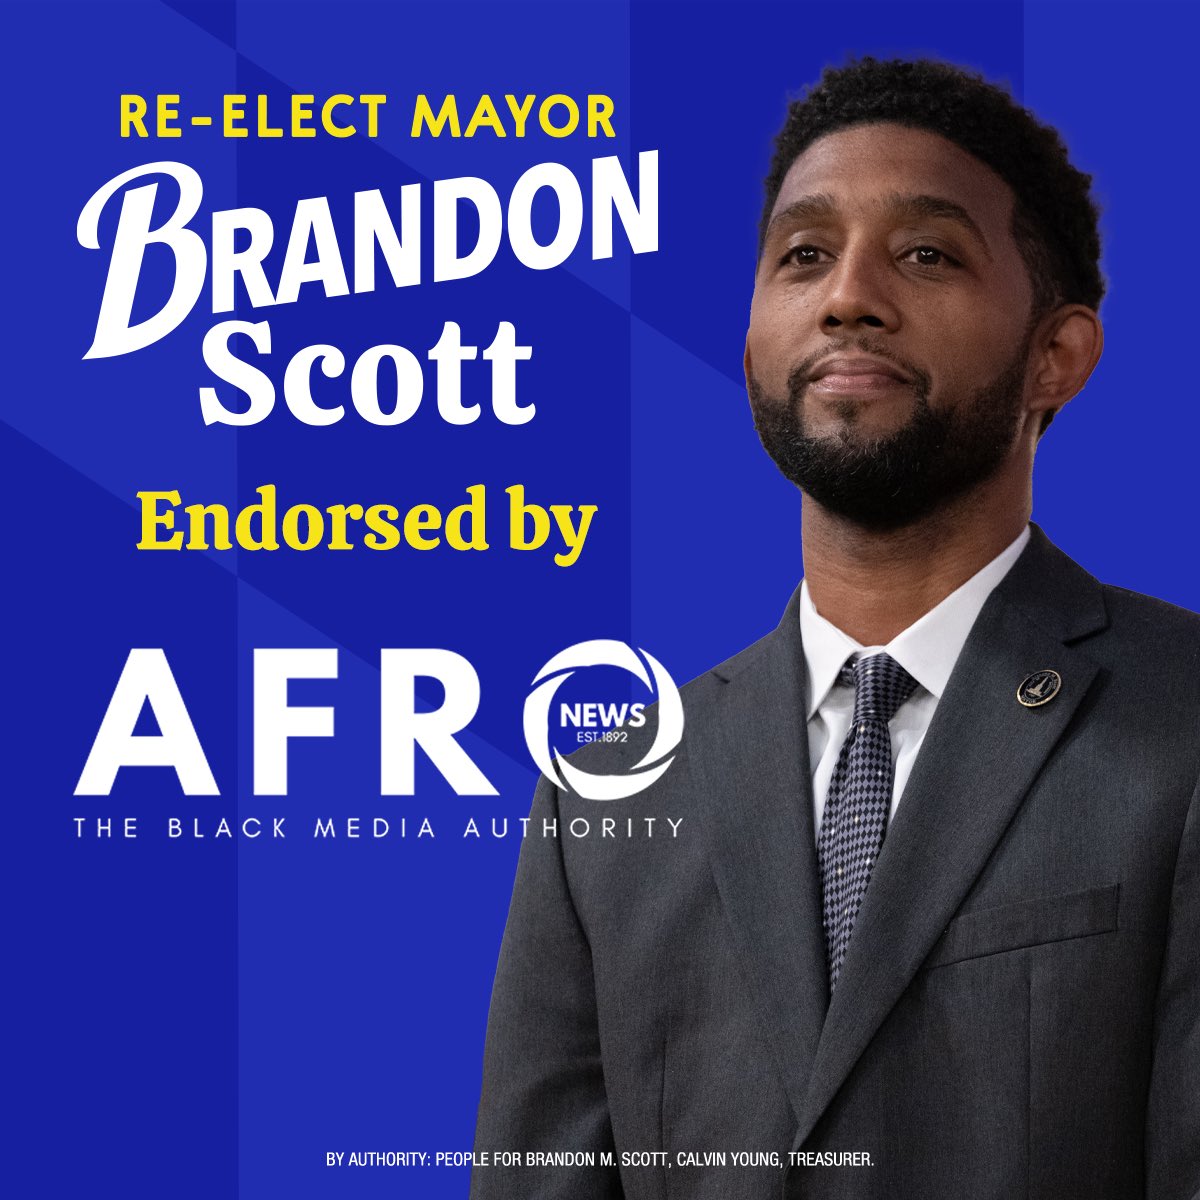 Extremely grateful to be endorsed by Baltimore’s @afronews newspaper. Baltimore can’t afford to go back to the broken ways of the past. Let’s keep moving forward.